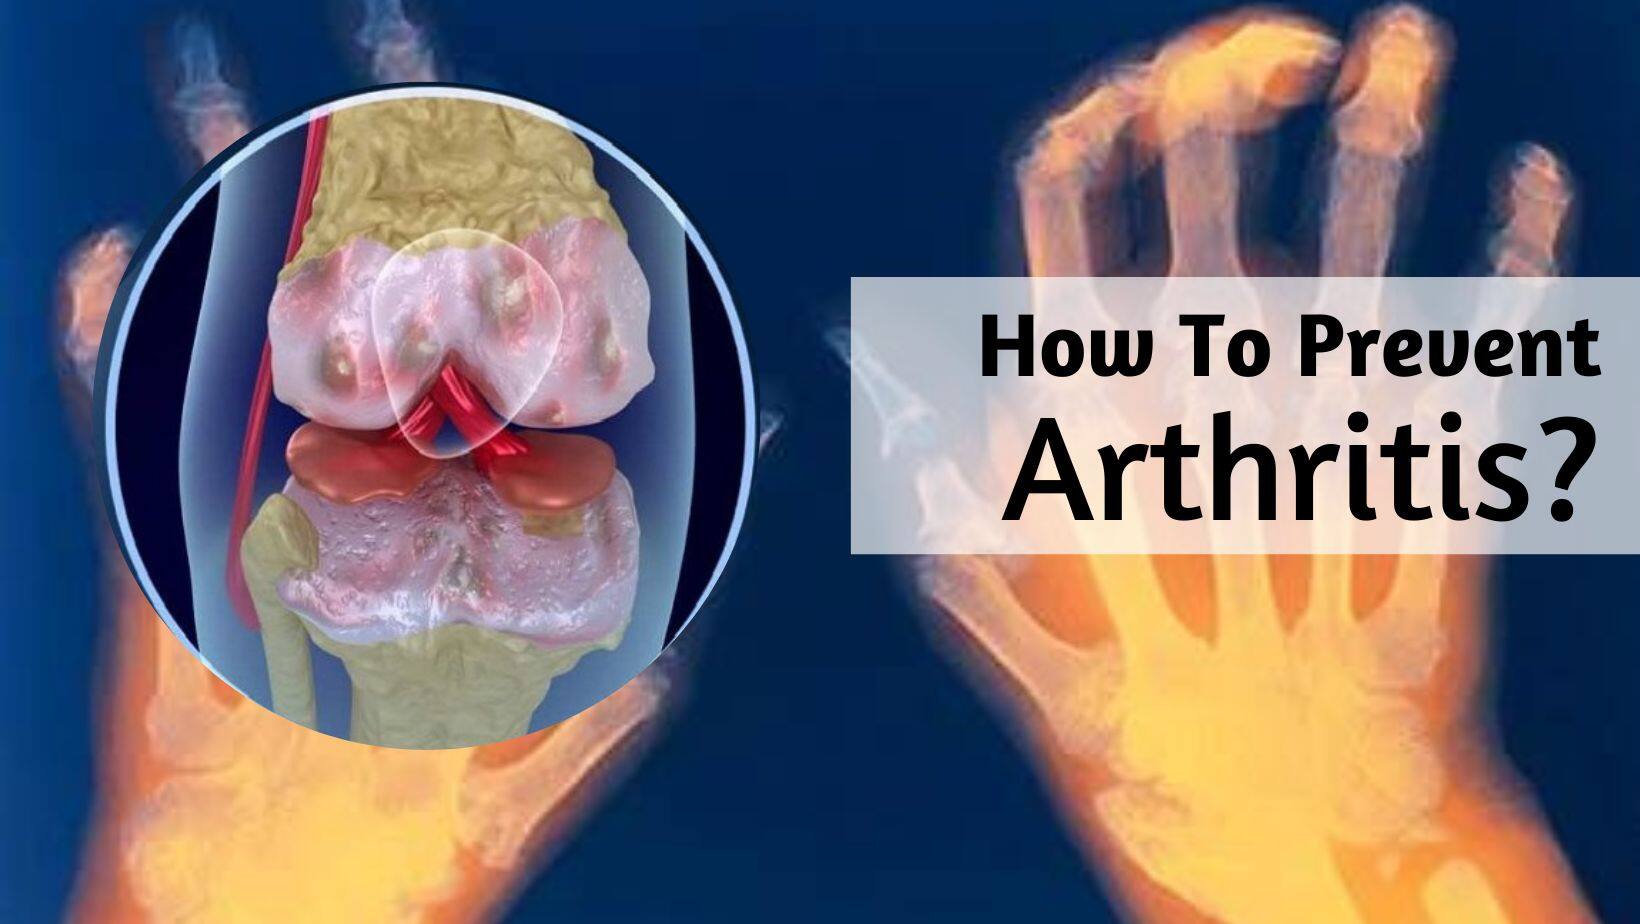 10 Things You Need to Stop Doing If You Have Arthritis